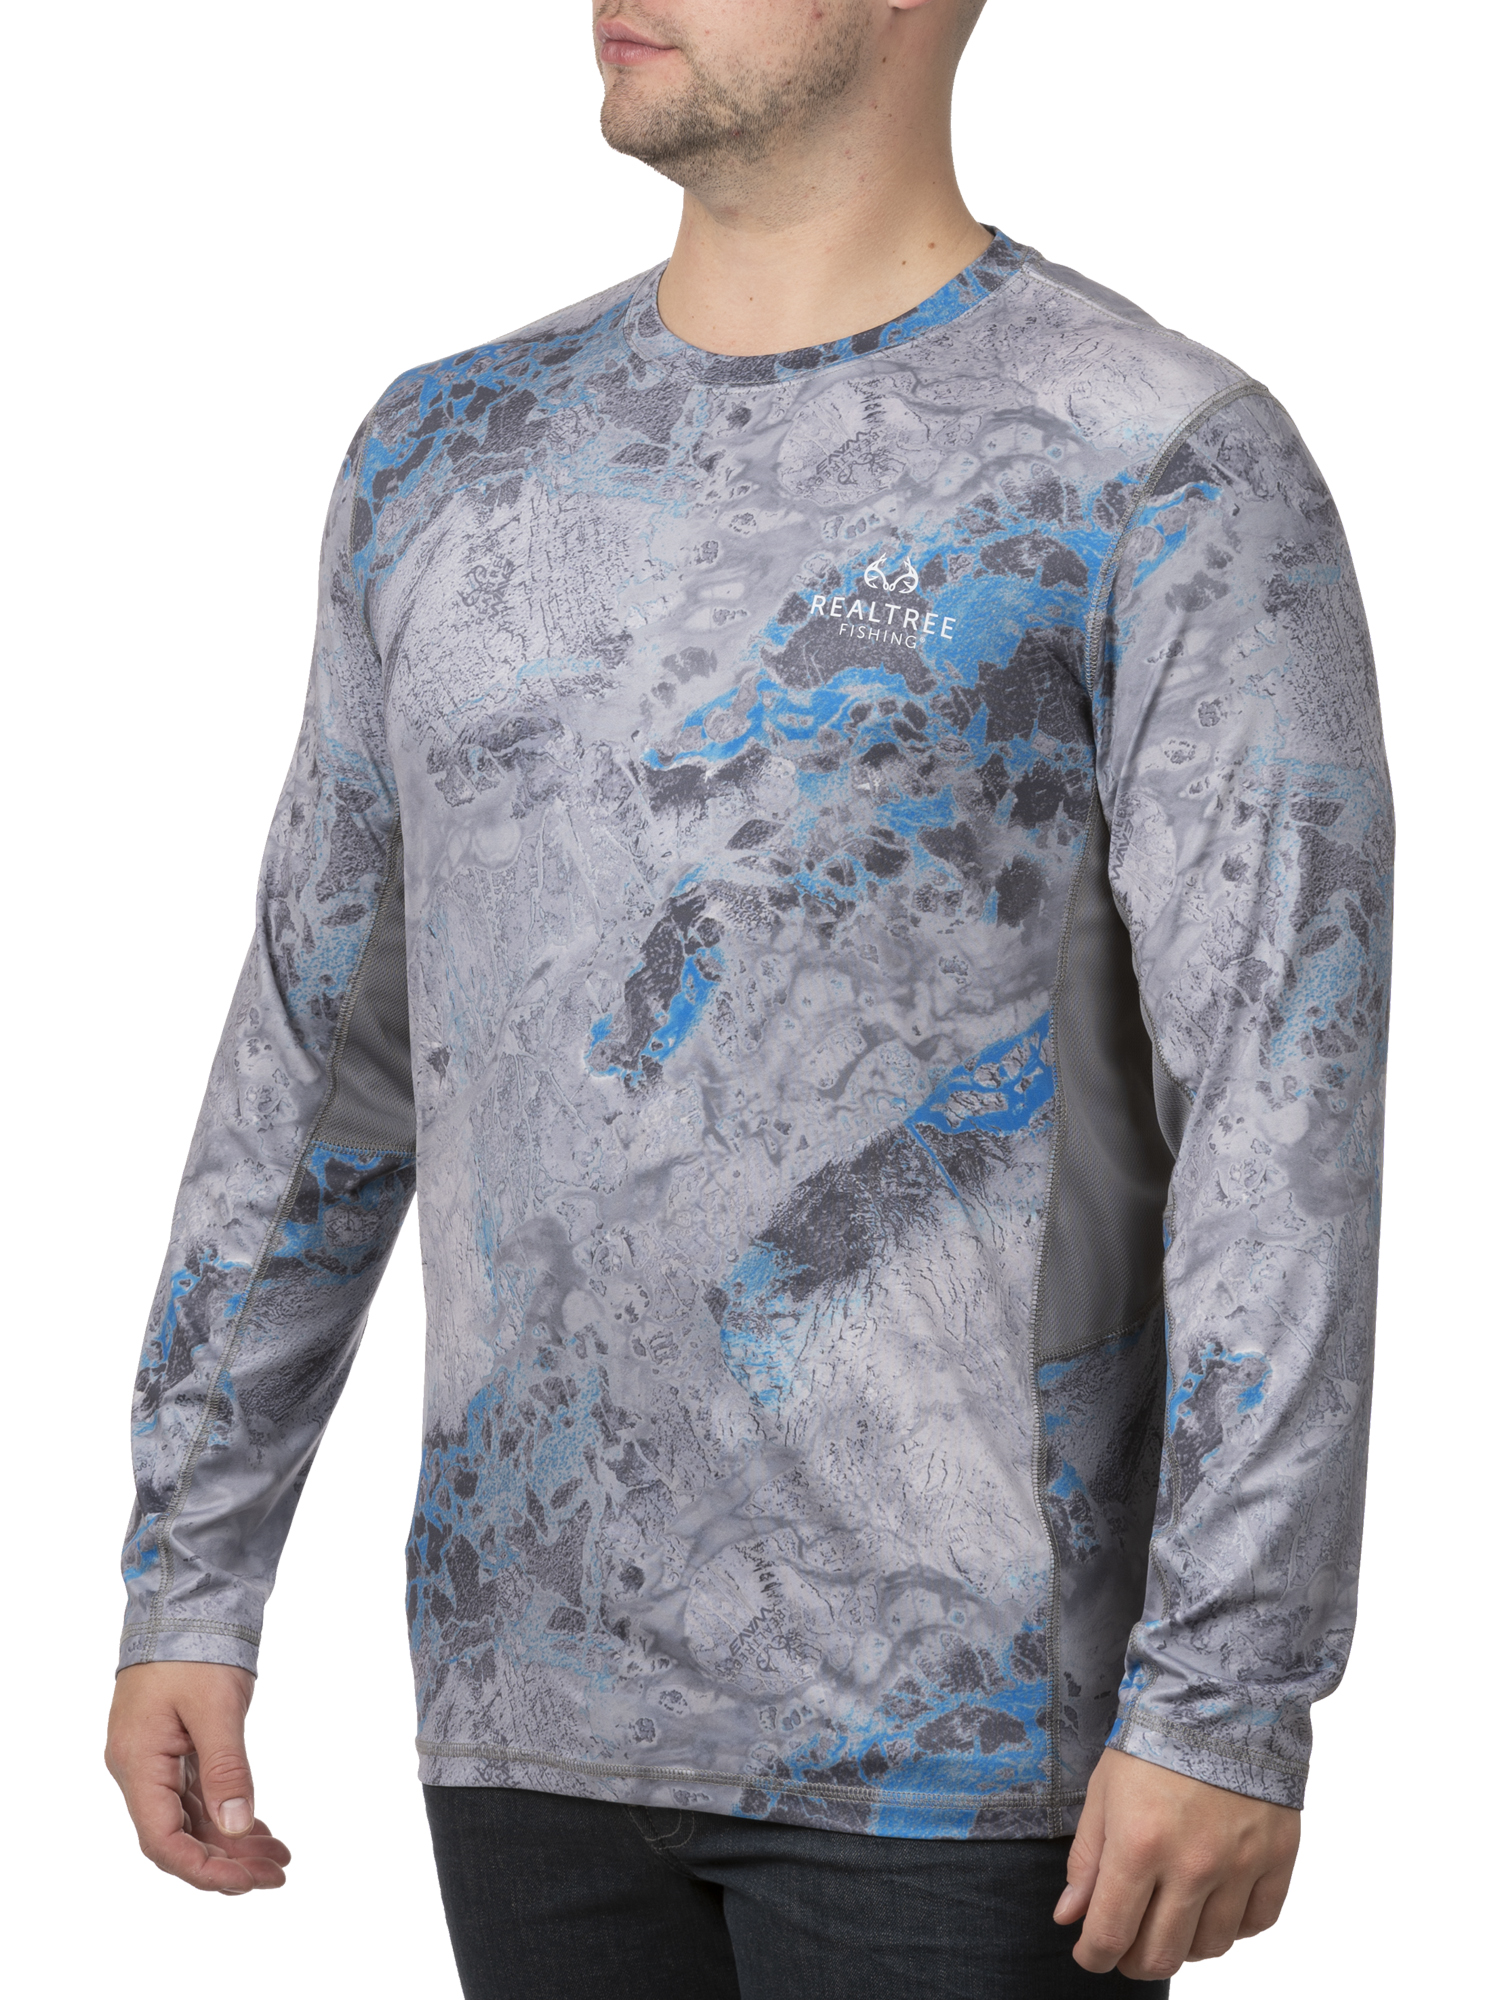 Realtree Long Sleeve Pullover Crew Neck Relaxed Fit T-Shirt (Men's) 1 Pack - image 1 of 3